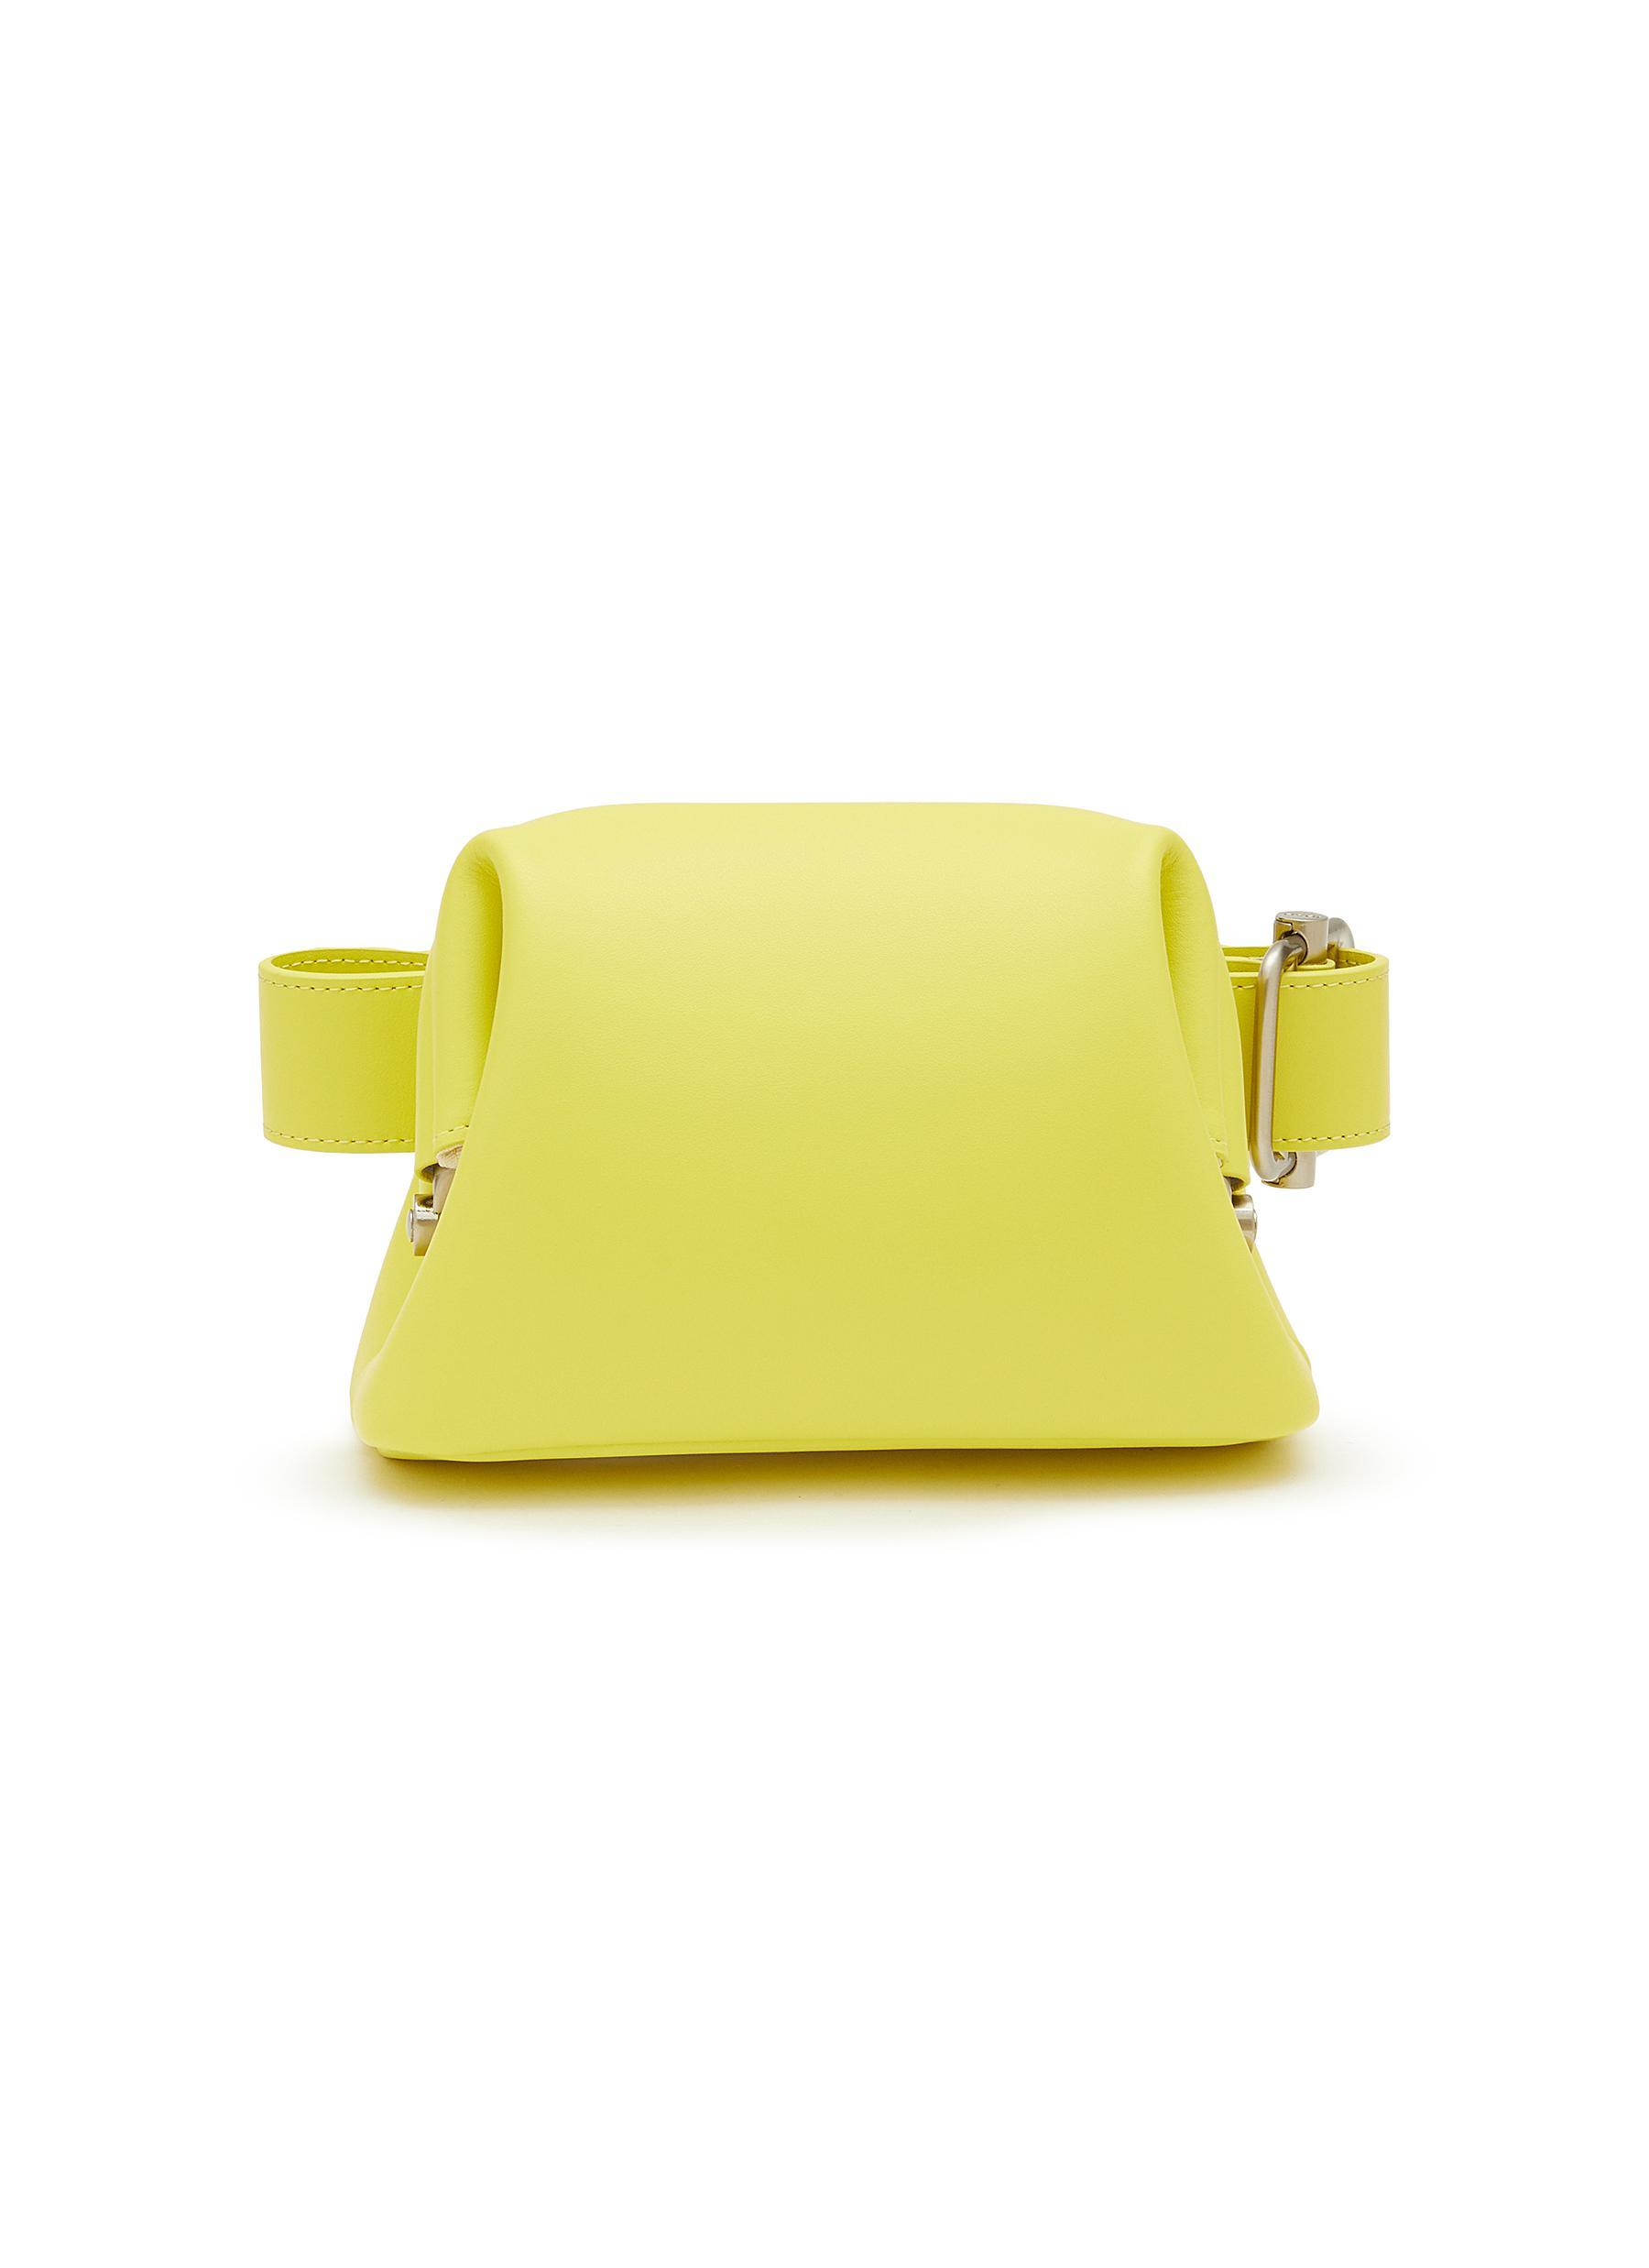 OSOI 'pecan Brot' Adjustable Strap Leather Crossbody Bag in Yellow | Lyst